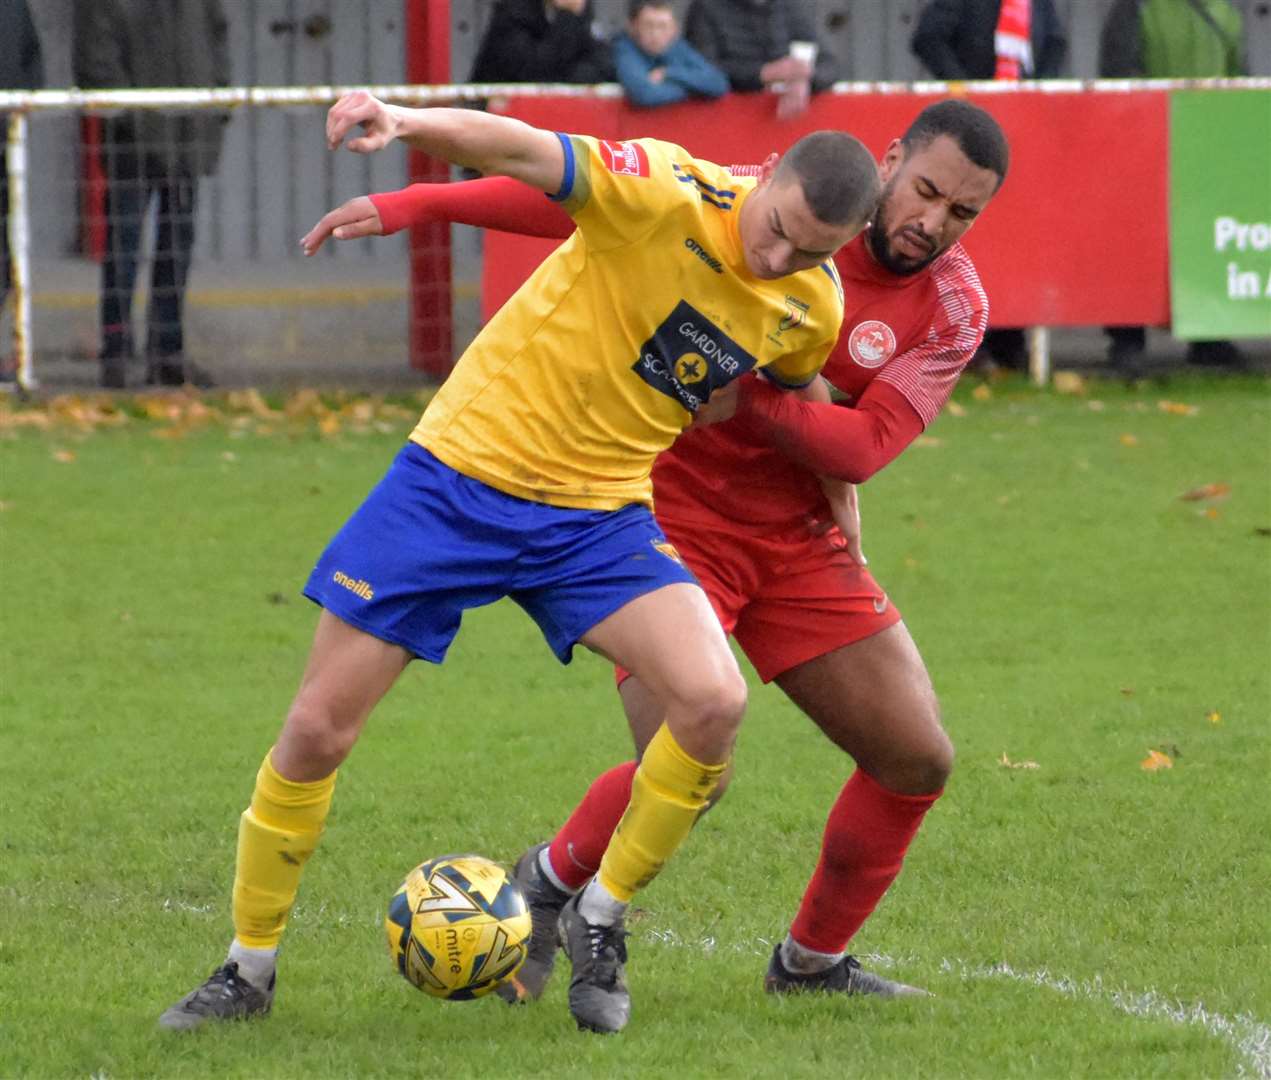 Hythe striker Johan Caney-Bryan in action against Lancing. Picture: Randolph File